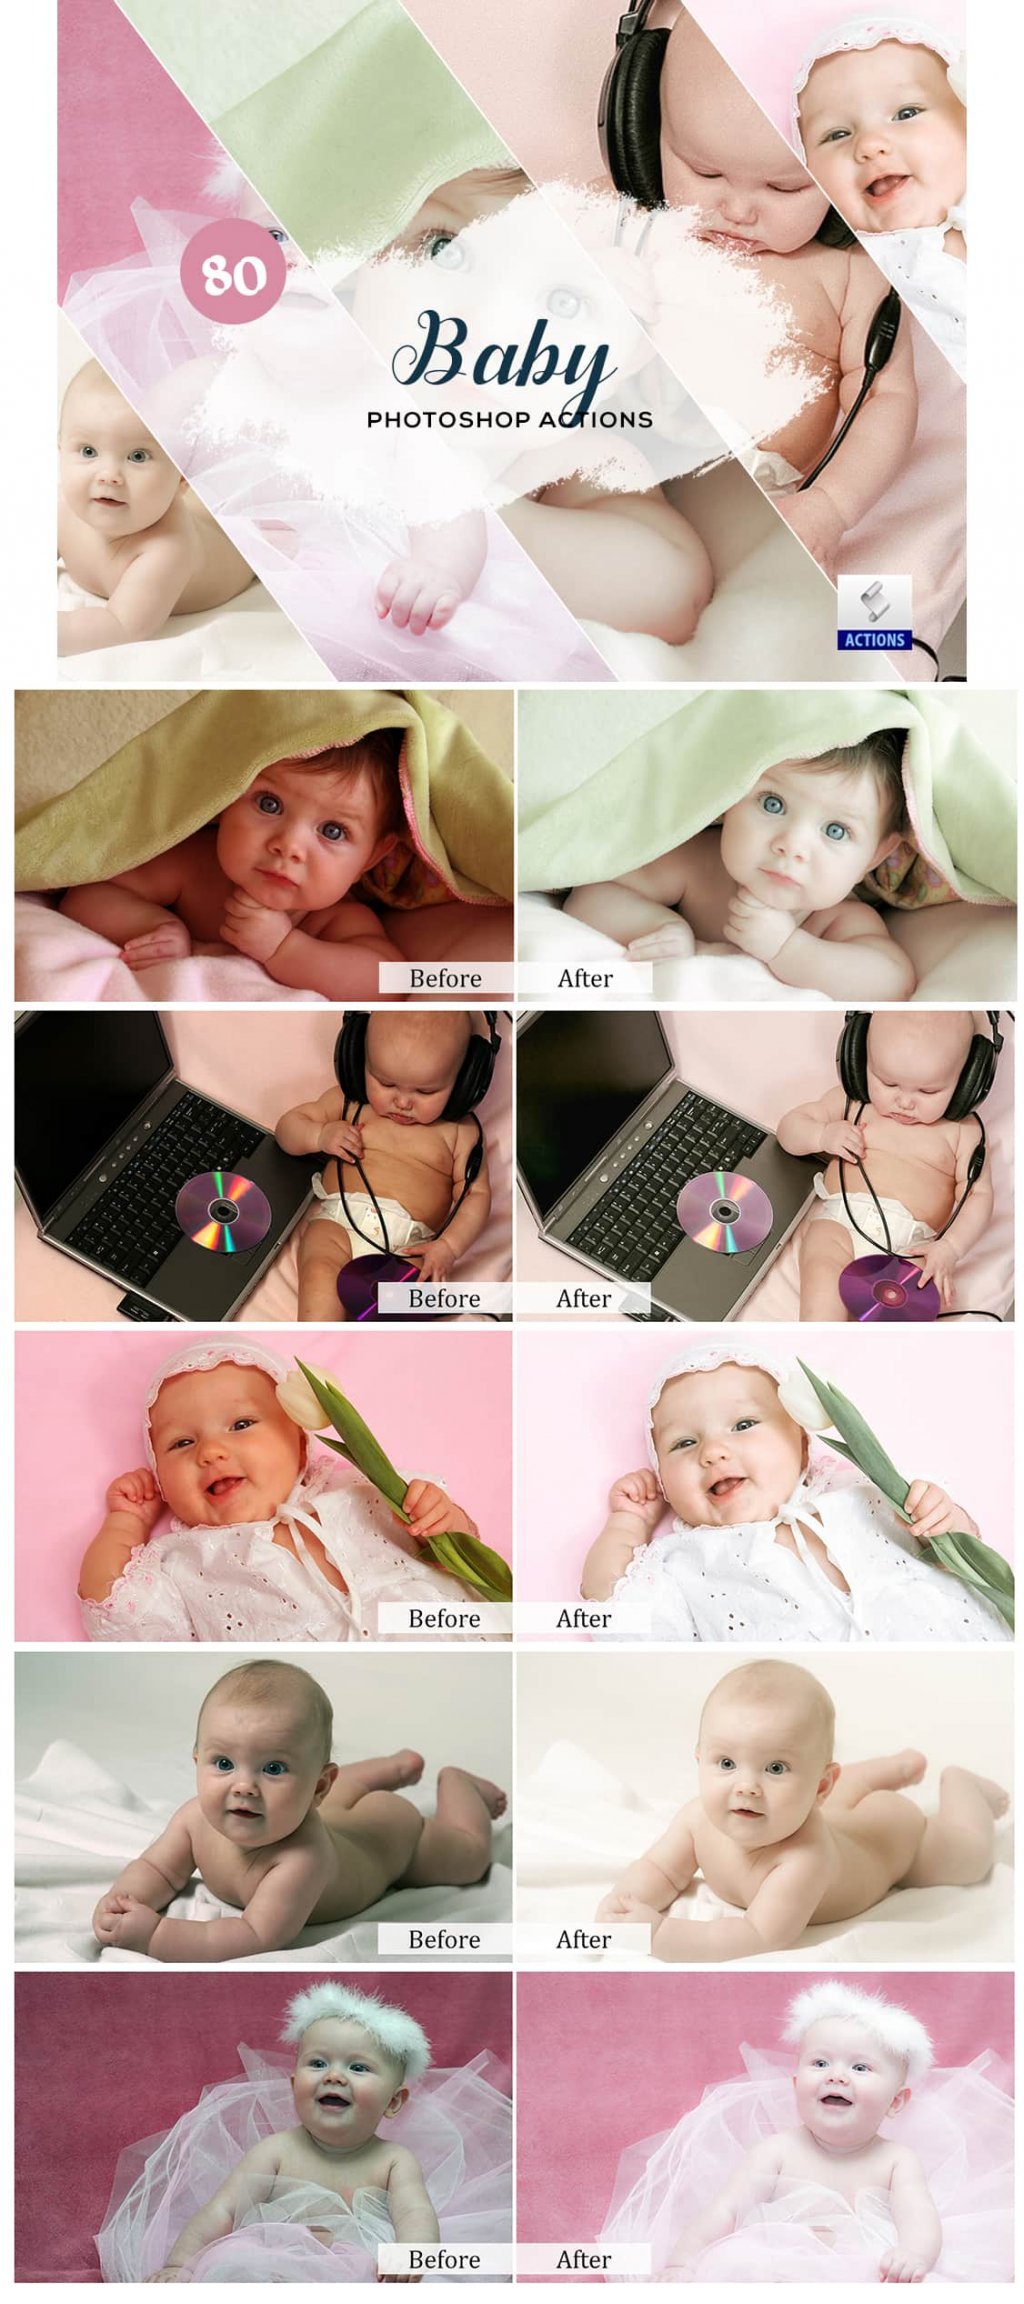 Baby photoshop Actions